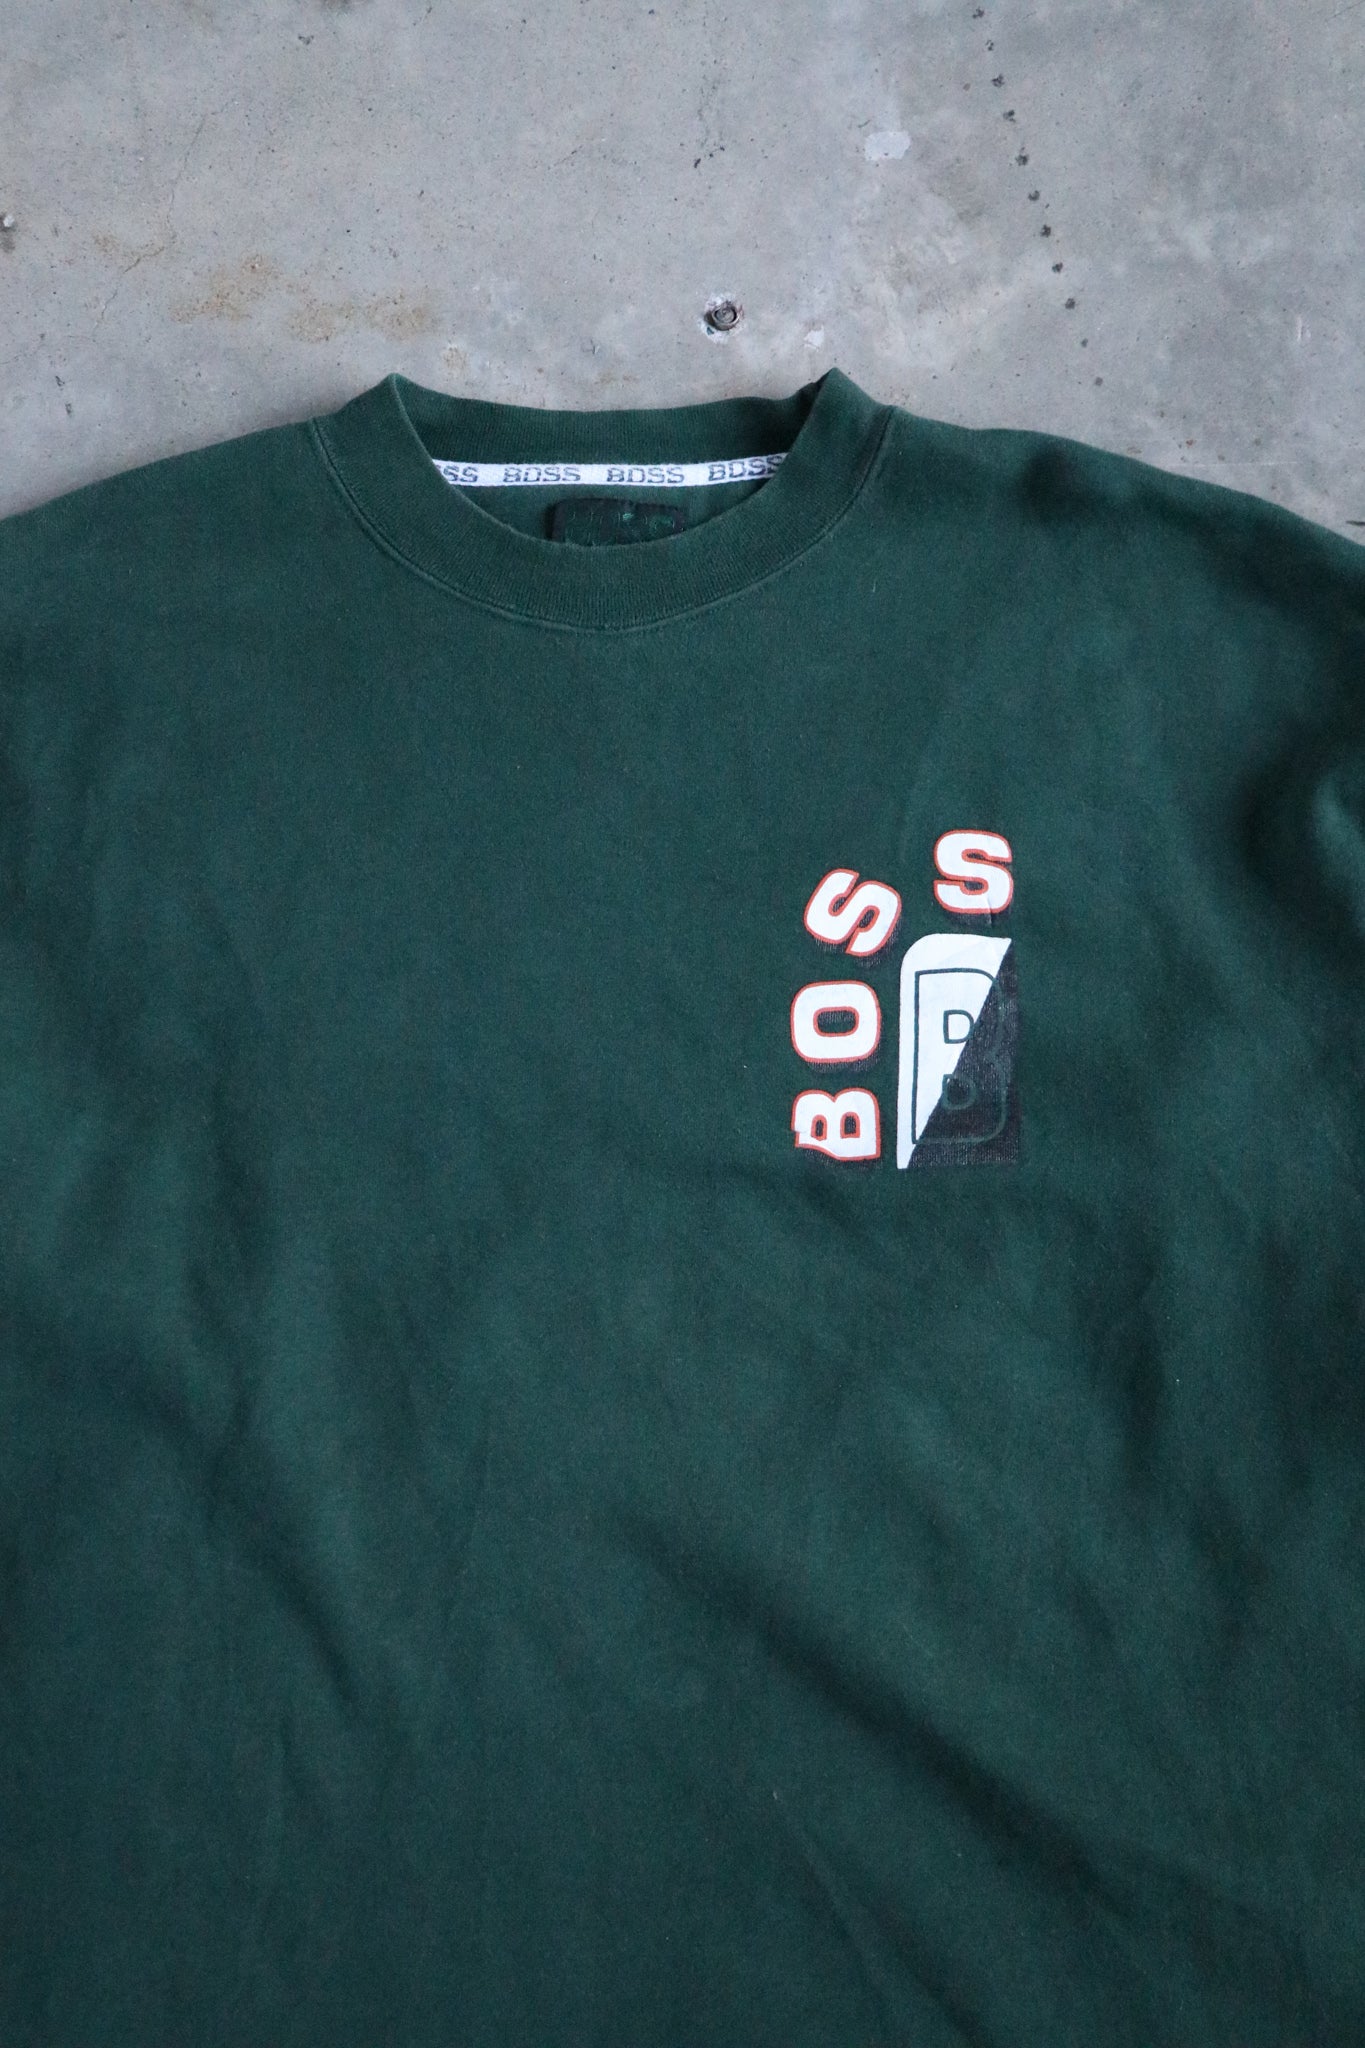 Vintage Boss Spell Out Sweater Large